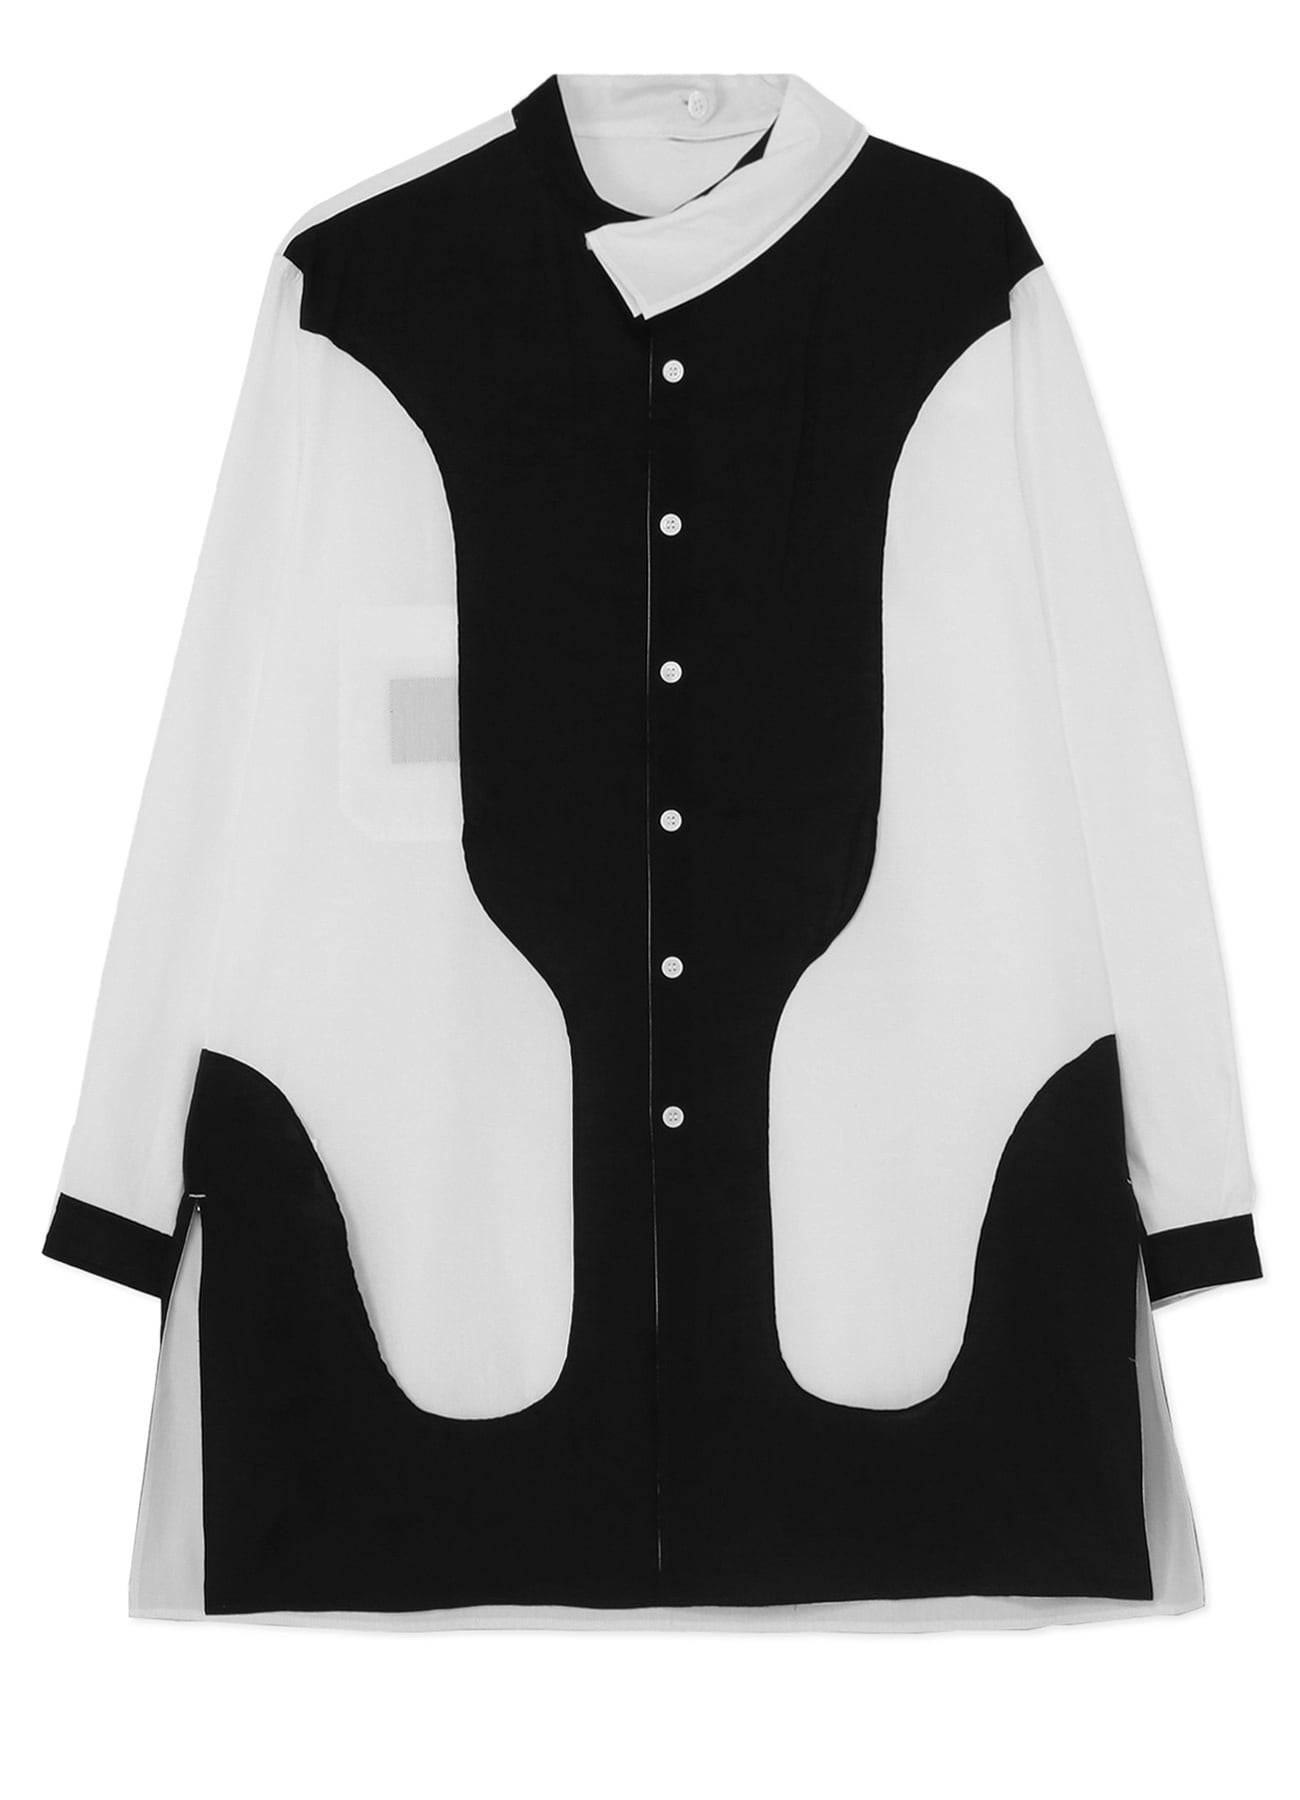 BLACK AND WHITE SHIRT WITH HALF DOUBLE COLLAR(S White): power of 